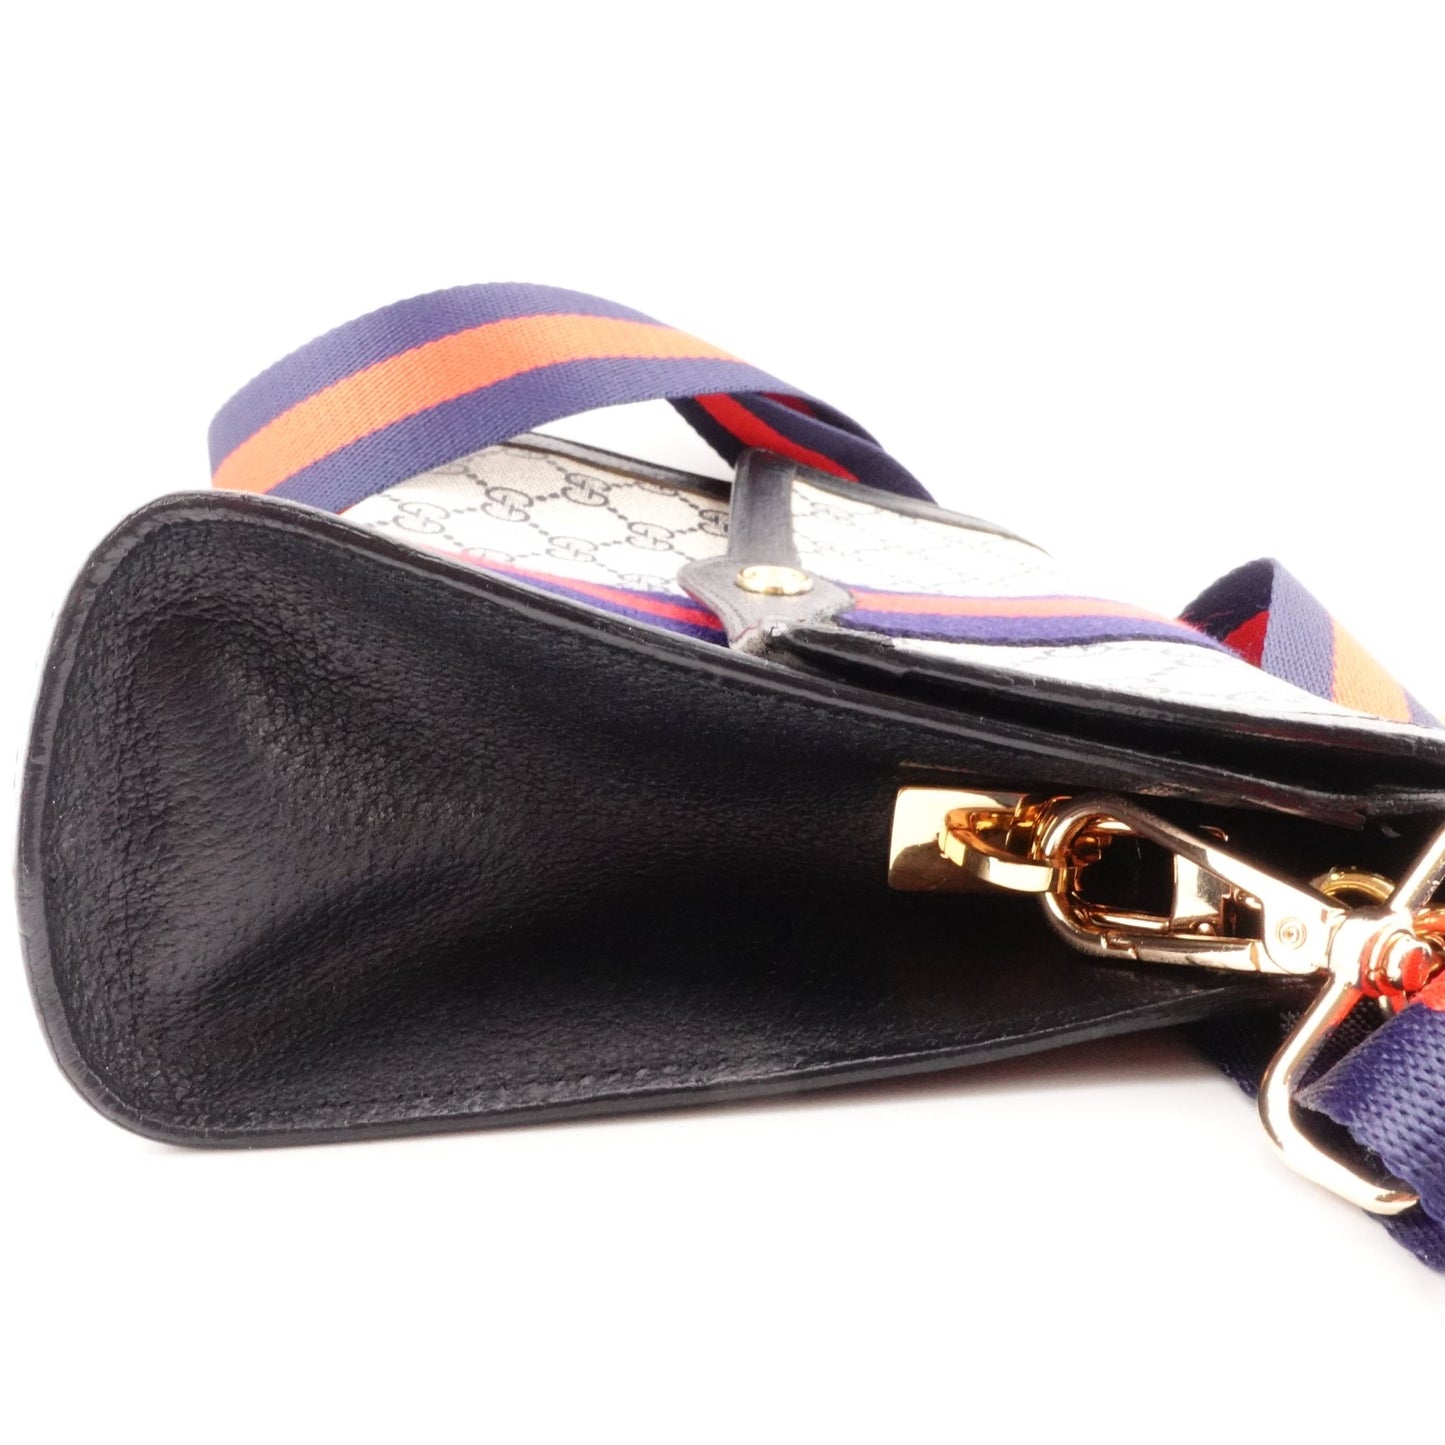 GUCCI Medium Ophidia Clutch with Strap and Chain - Bag Envy